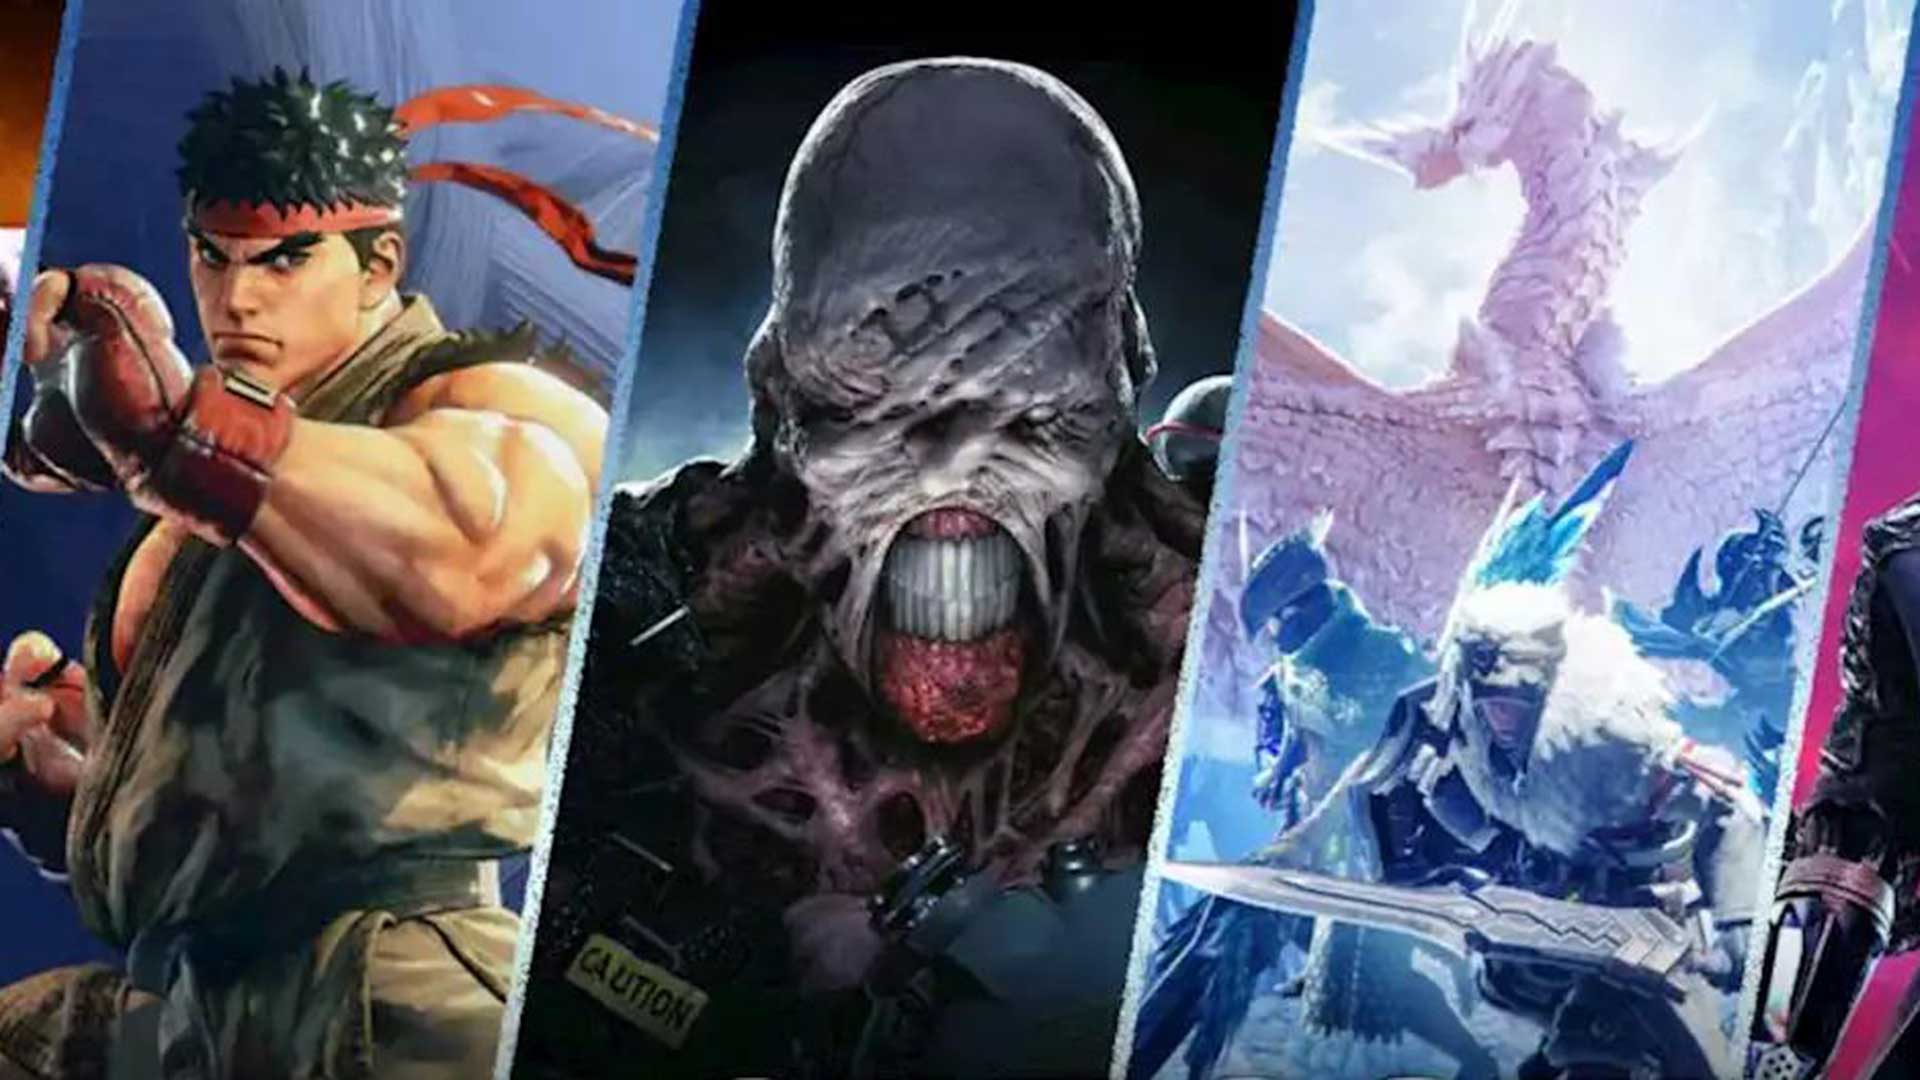 Capcom had record number of games sold in the last